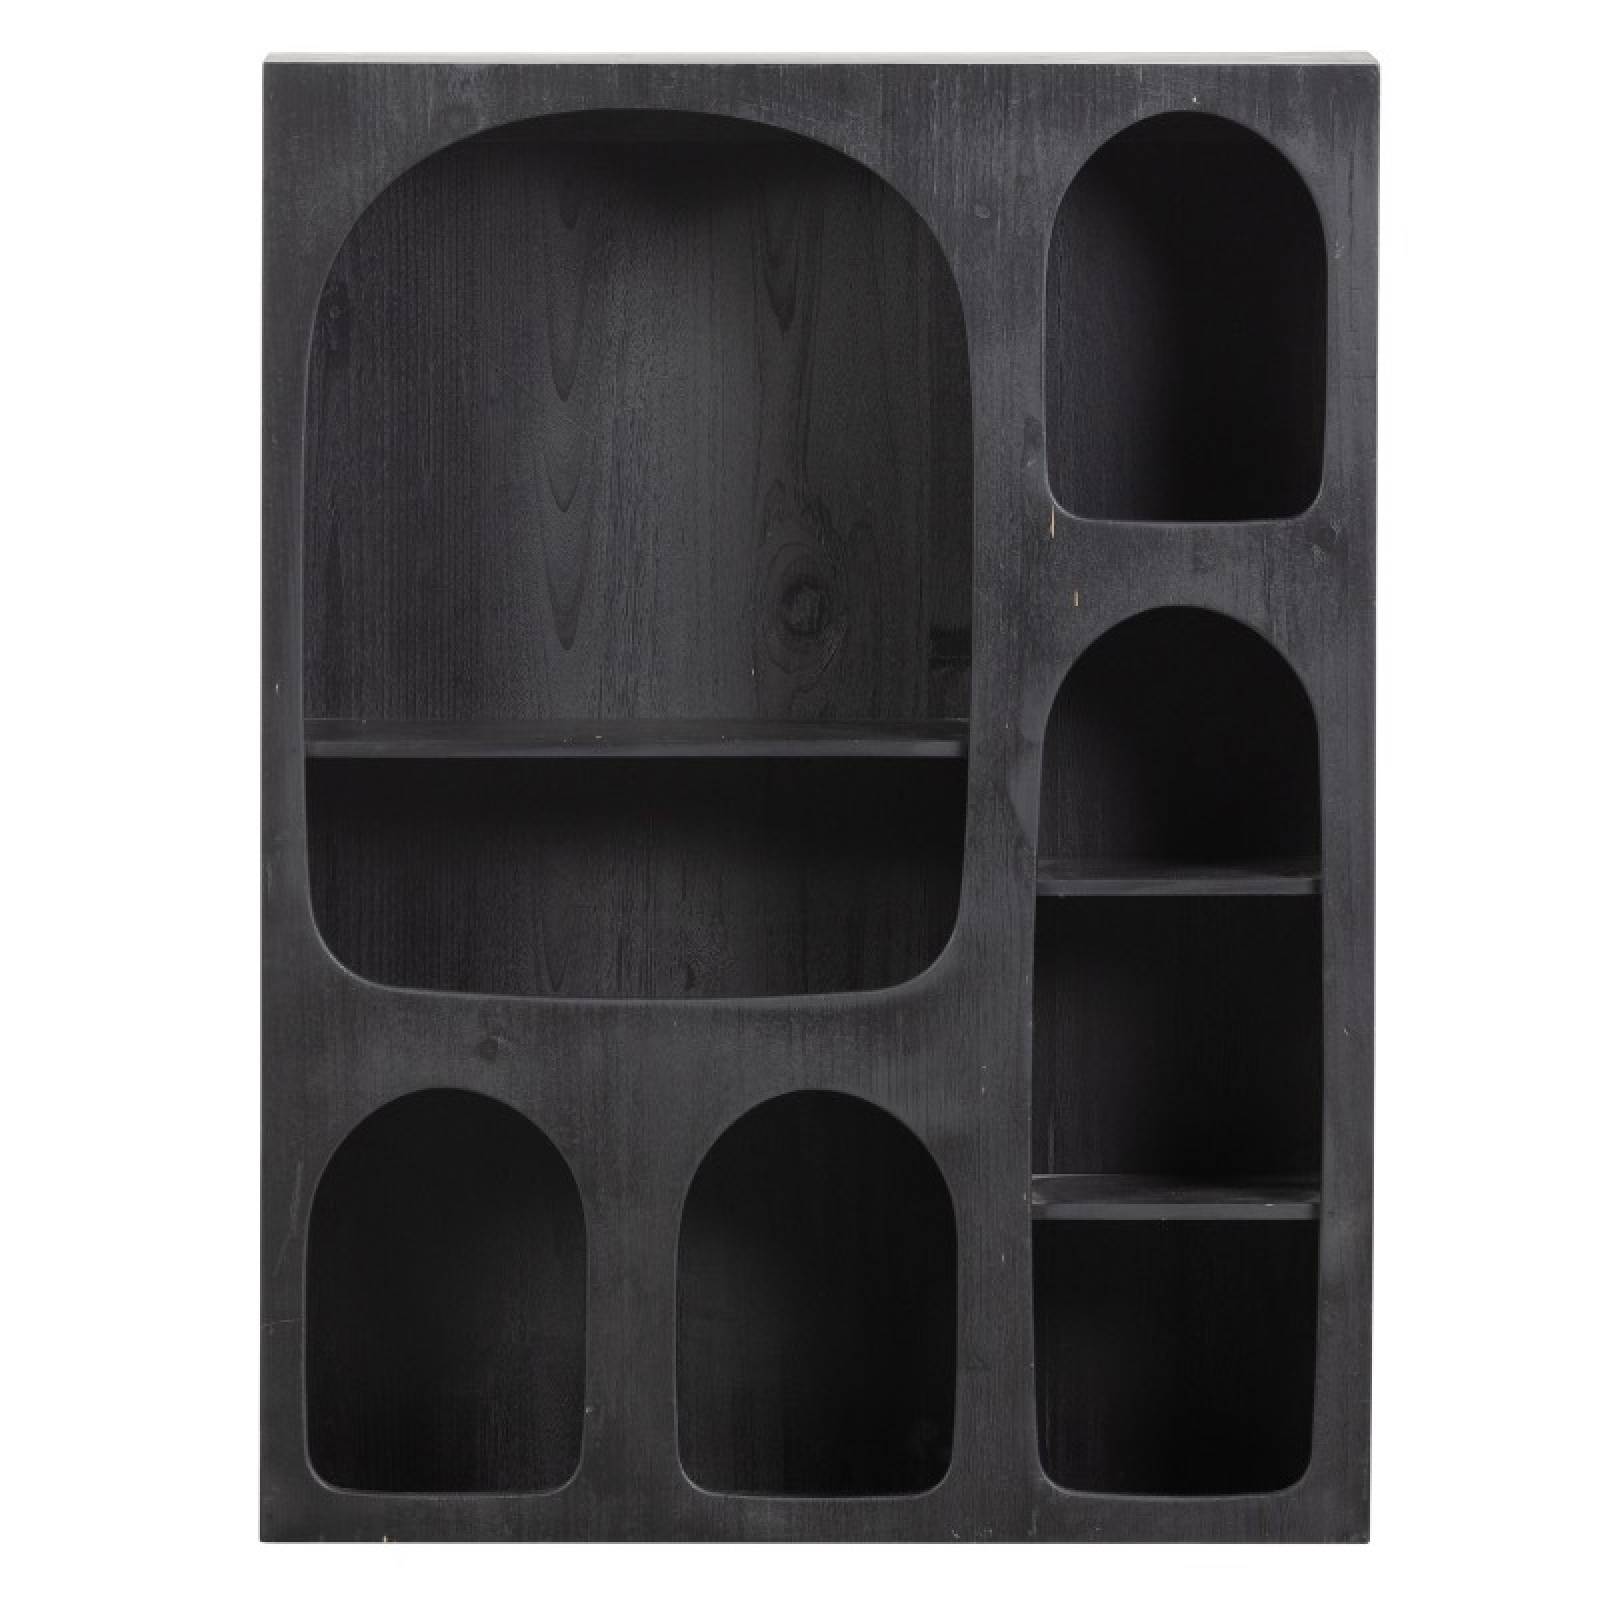 Rustic Wooden Wall Cabinet With Small Rounded Alcoves thumbnails